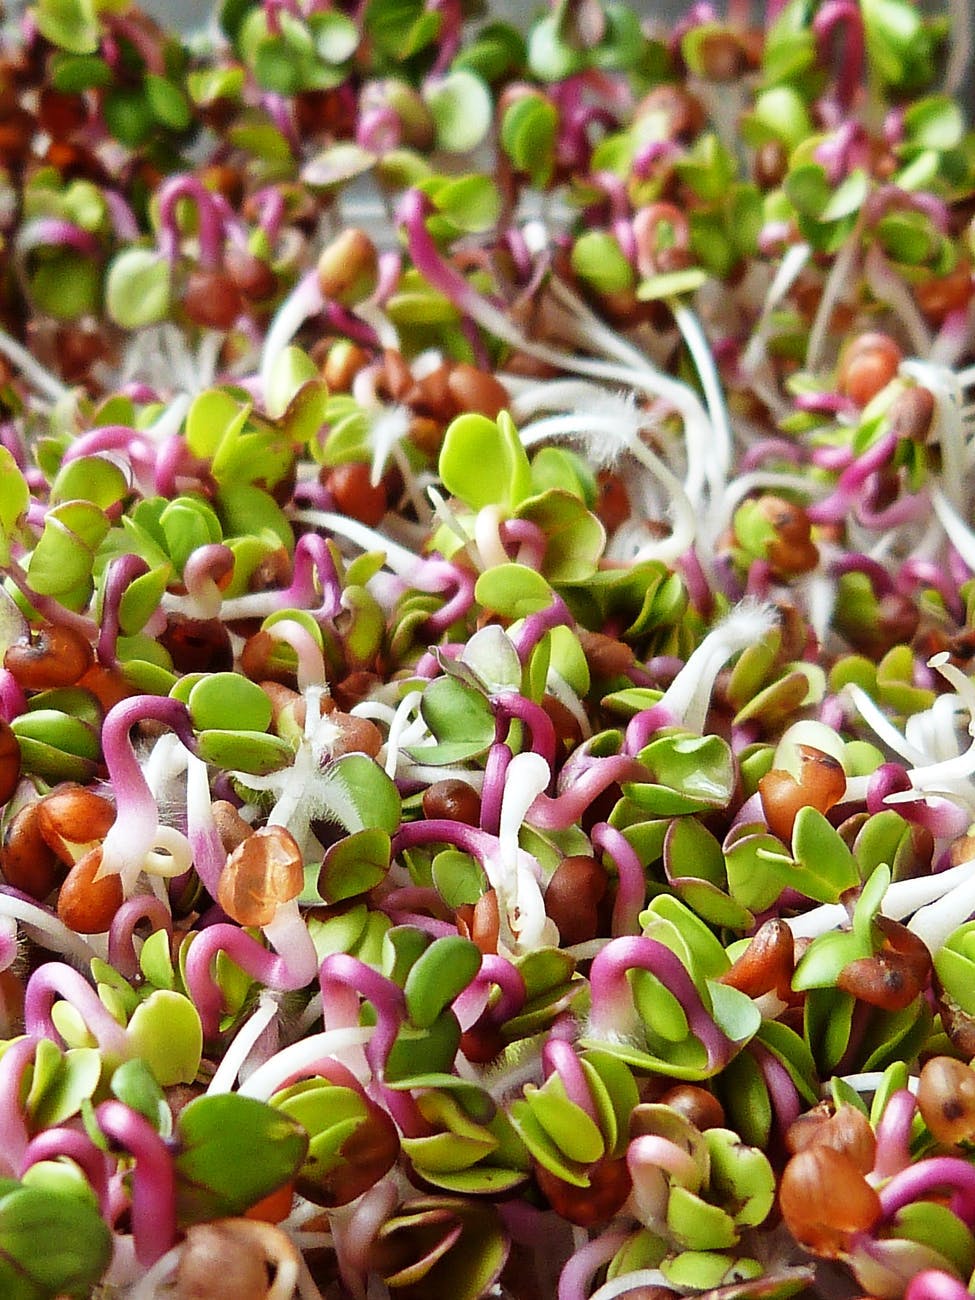 Plant,Alfalfa sprouts,Bean sprouts,Sprouting,Flowering plant,Flower,Alfalfa,Crop,Broccoli sprouts,Garden cress